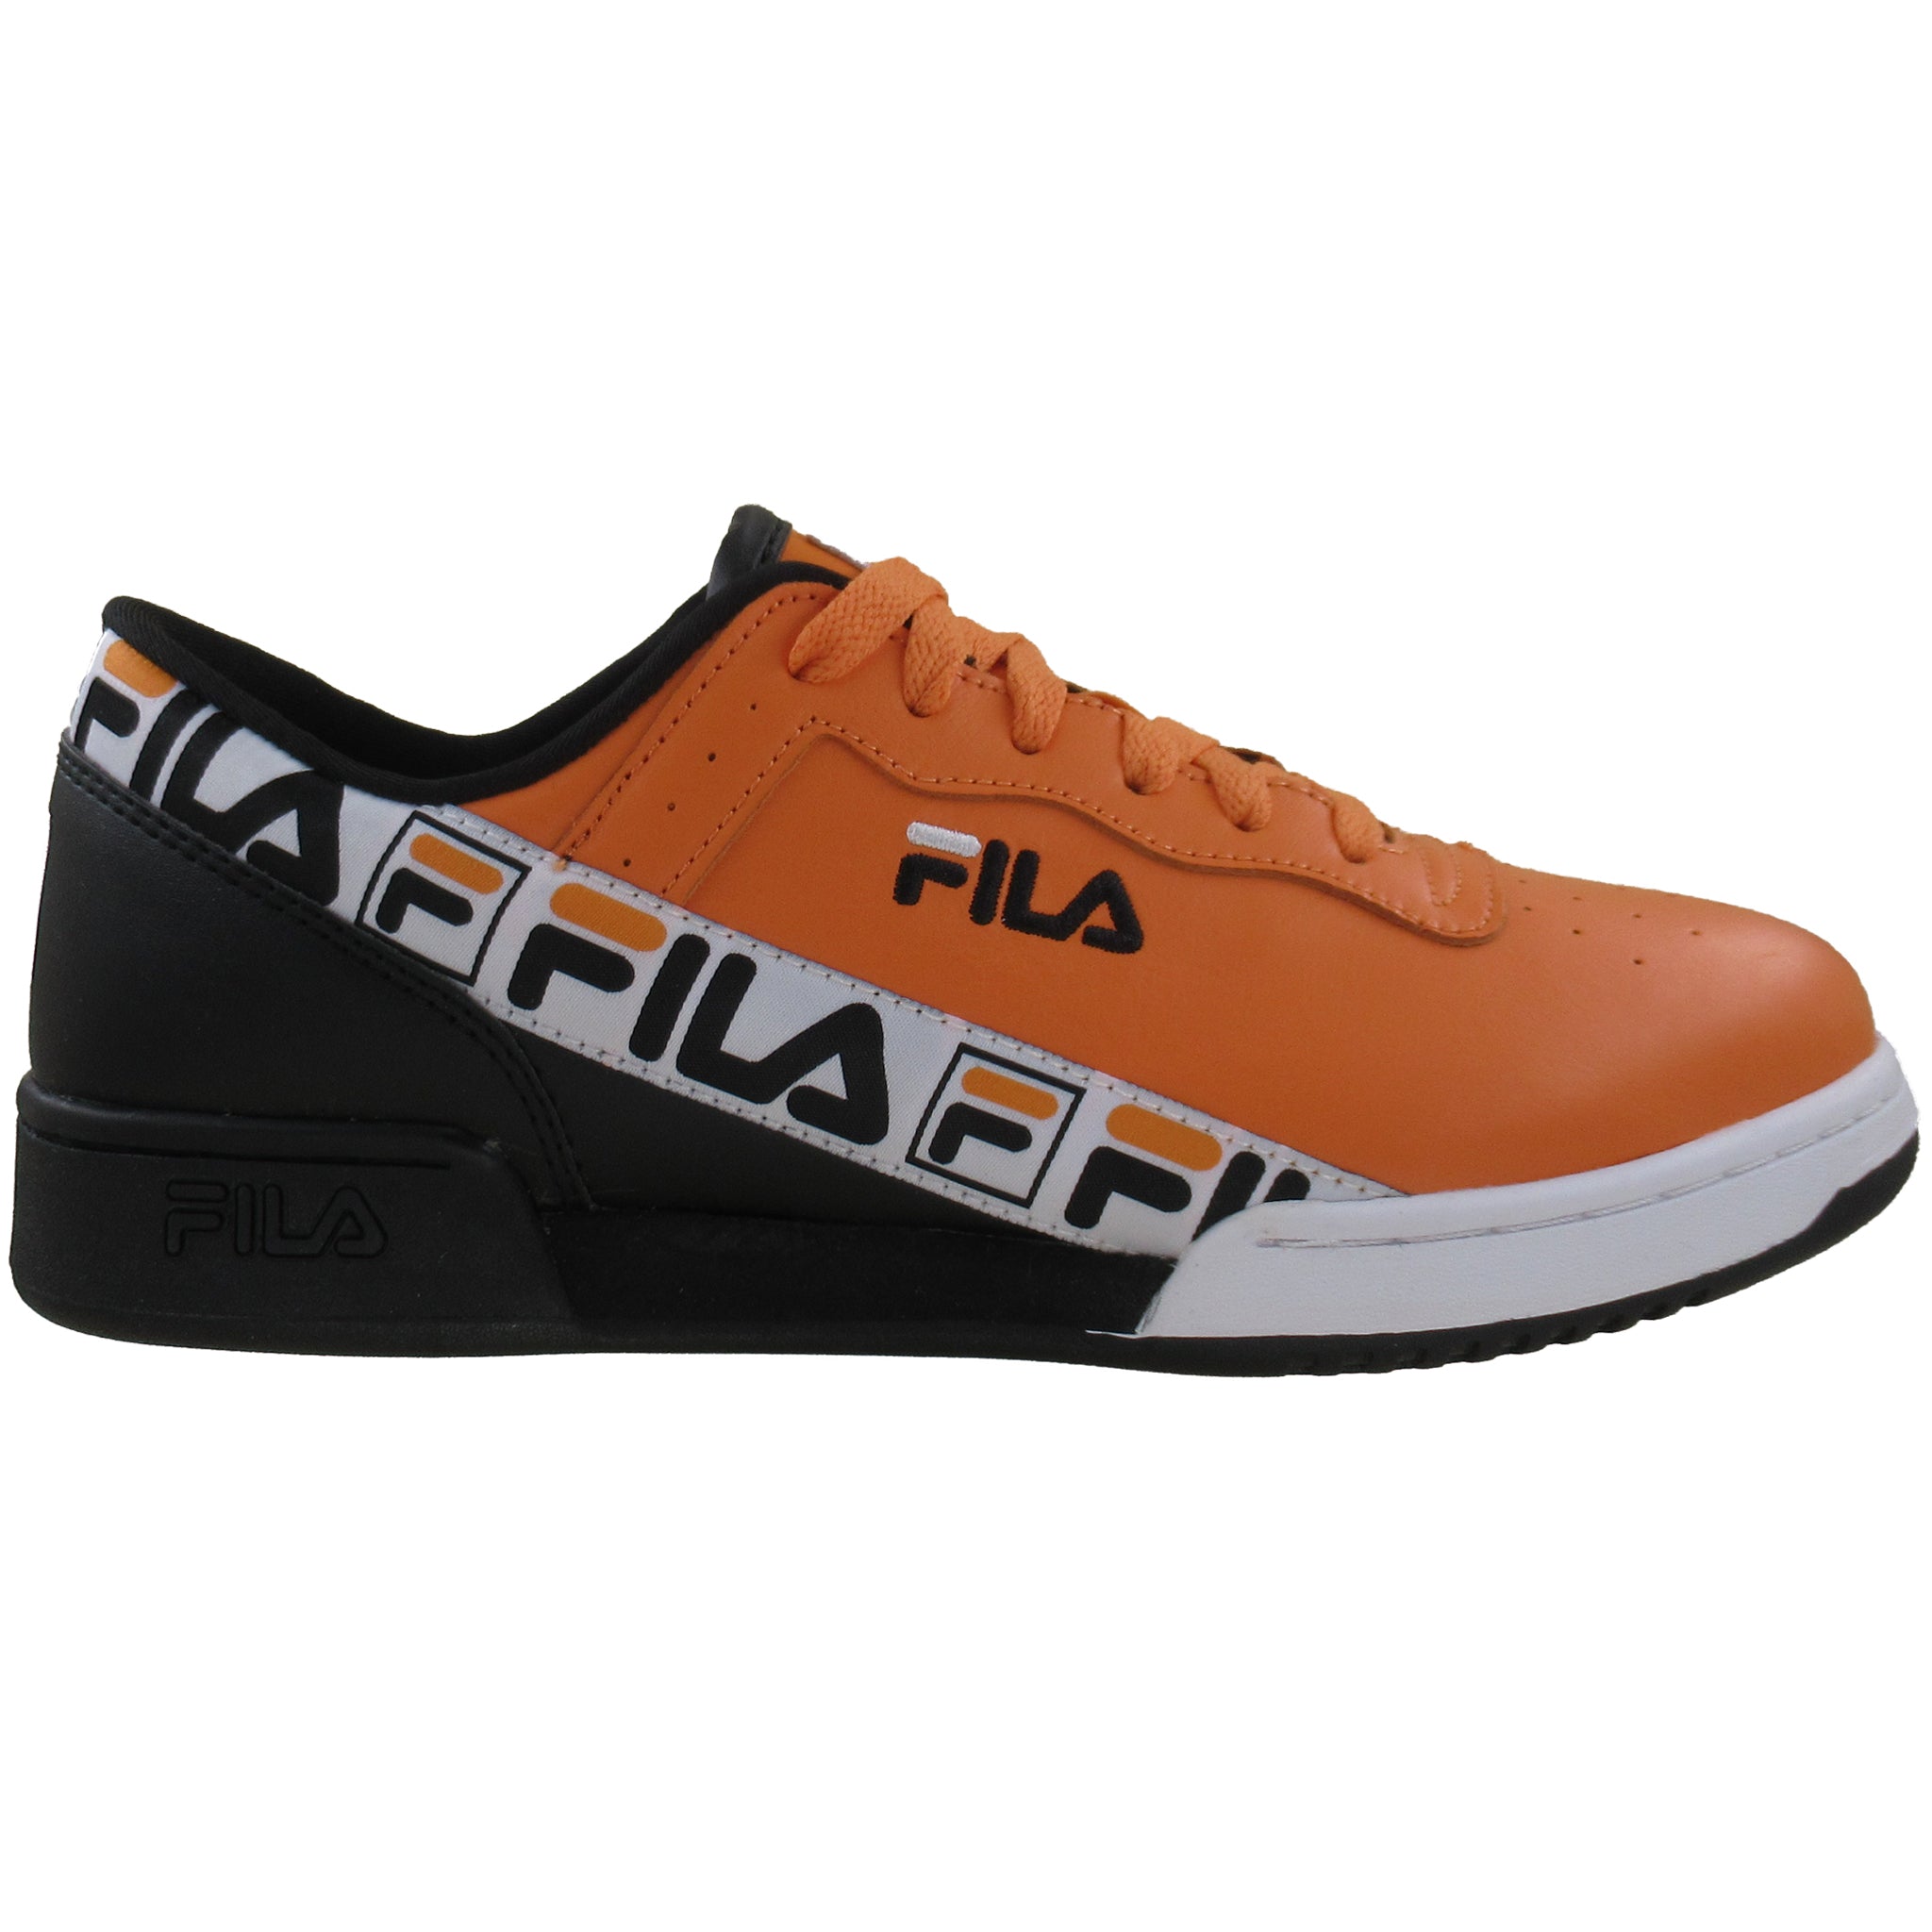 Fila Men's Tape Classic Retro Casual Athletic Shoes – That Shoe Store and More